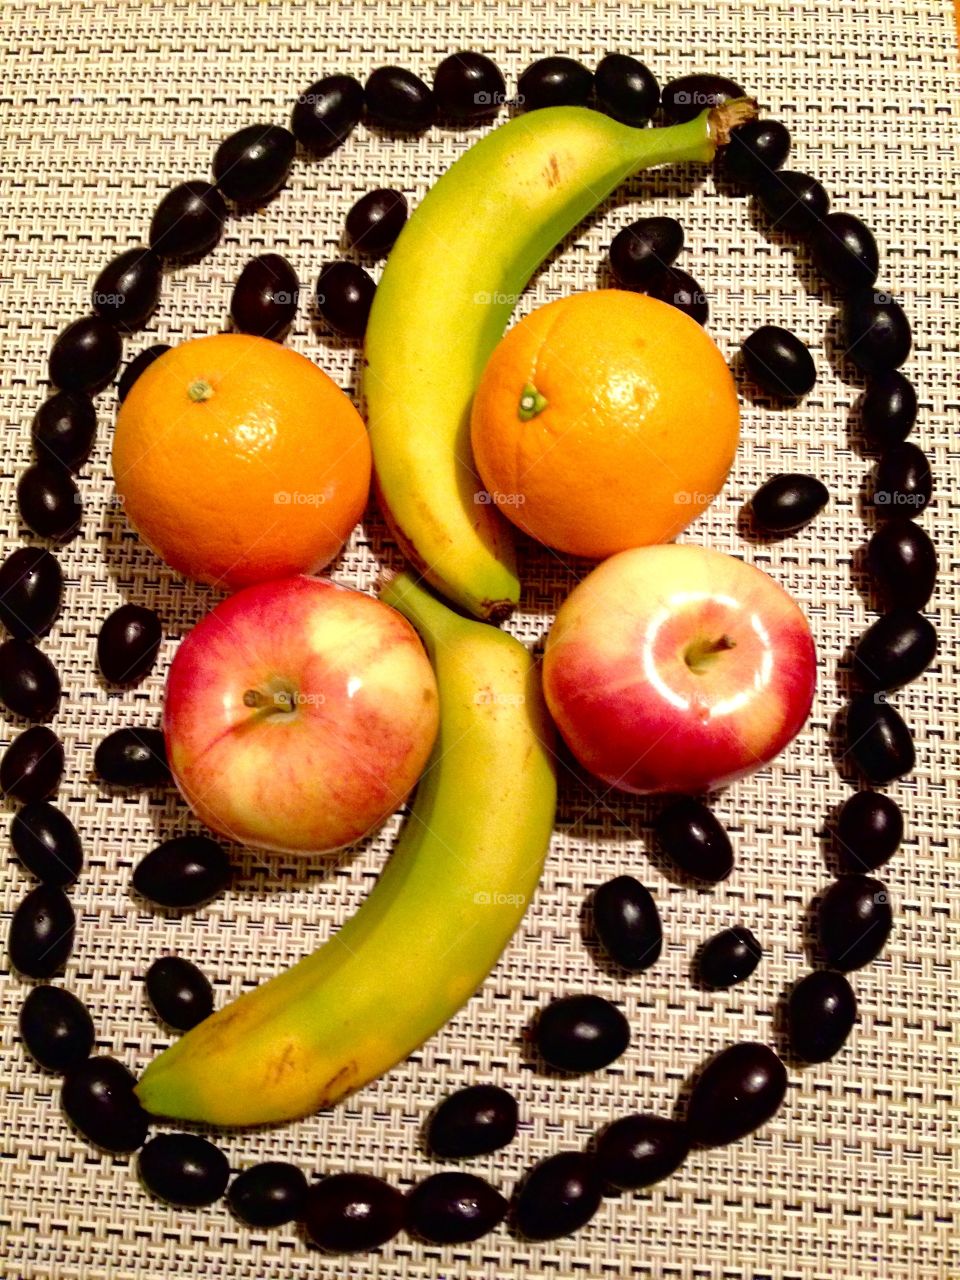 Delicious Assorted Fruits

Published by:
HappyBrownMonkey 